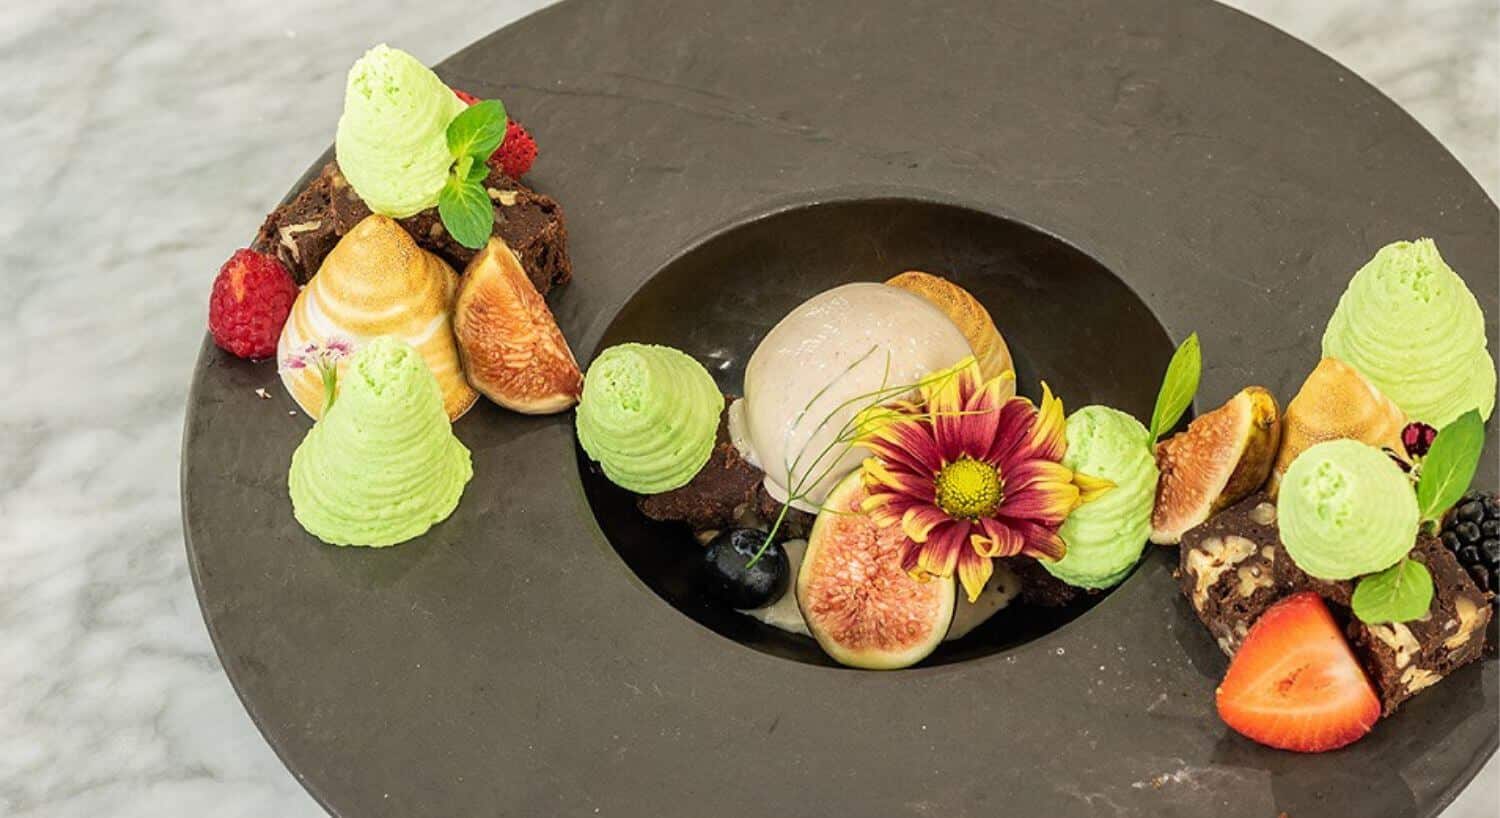 A grey plate and black bowl filled with ice cream and various fruits, brownies, and edible flowers.